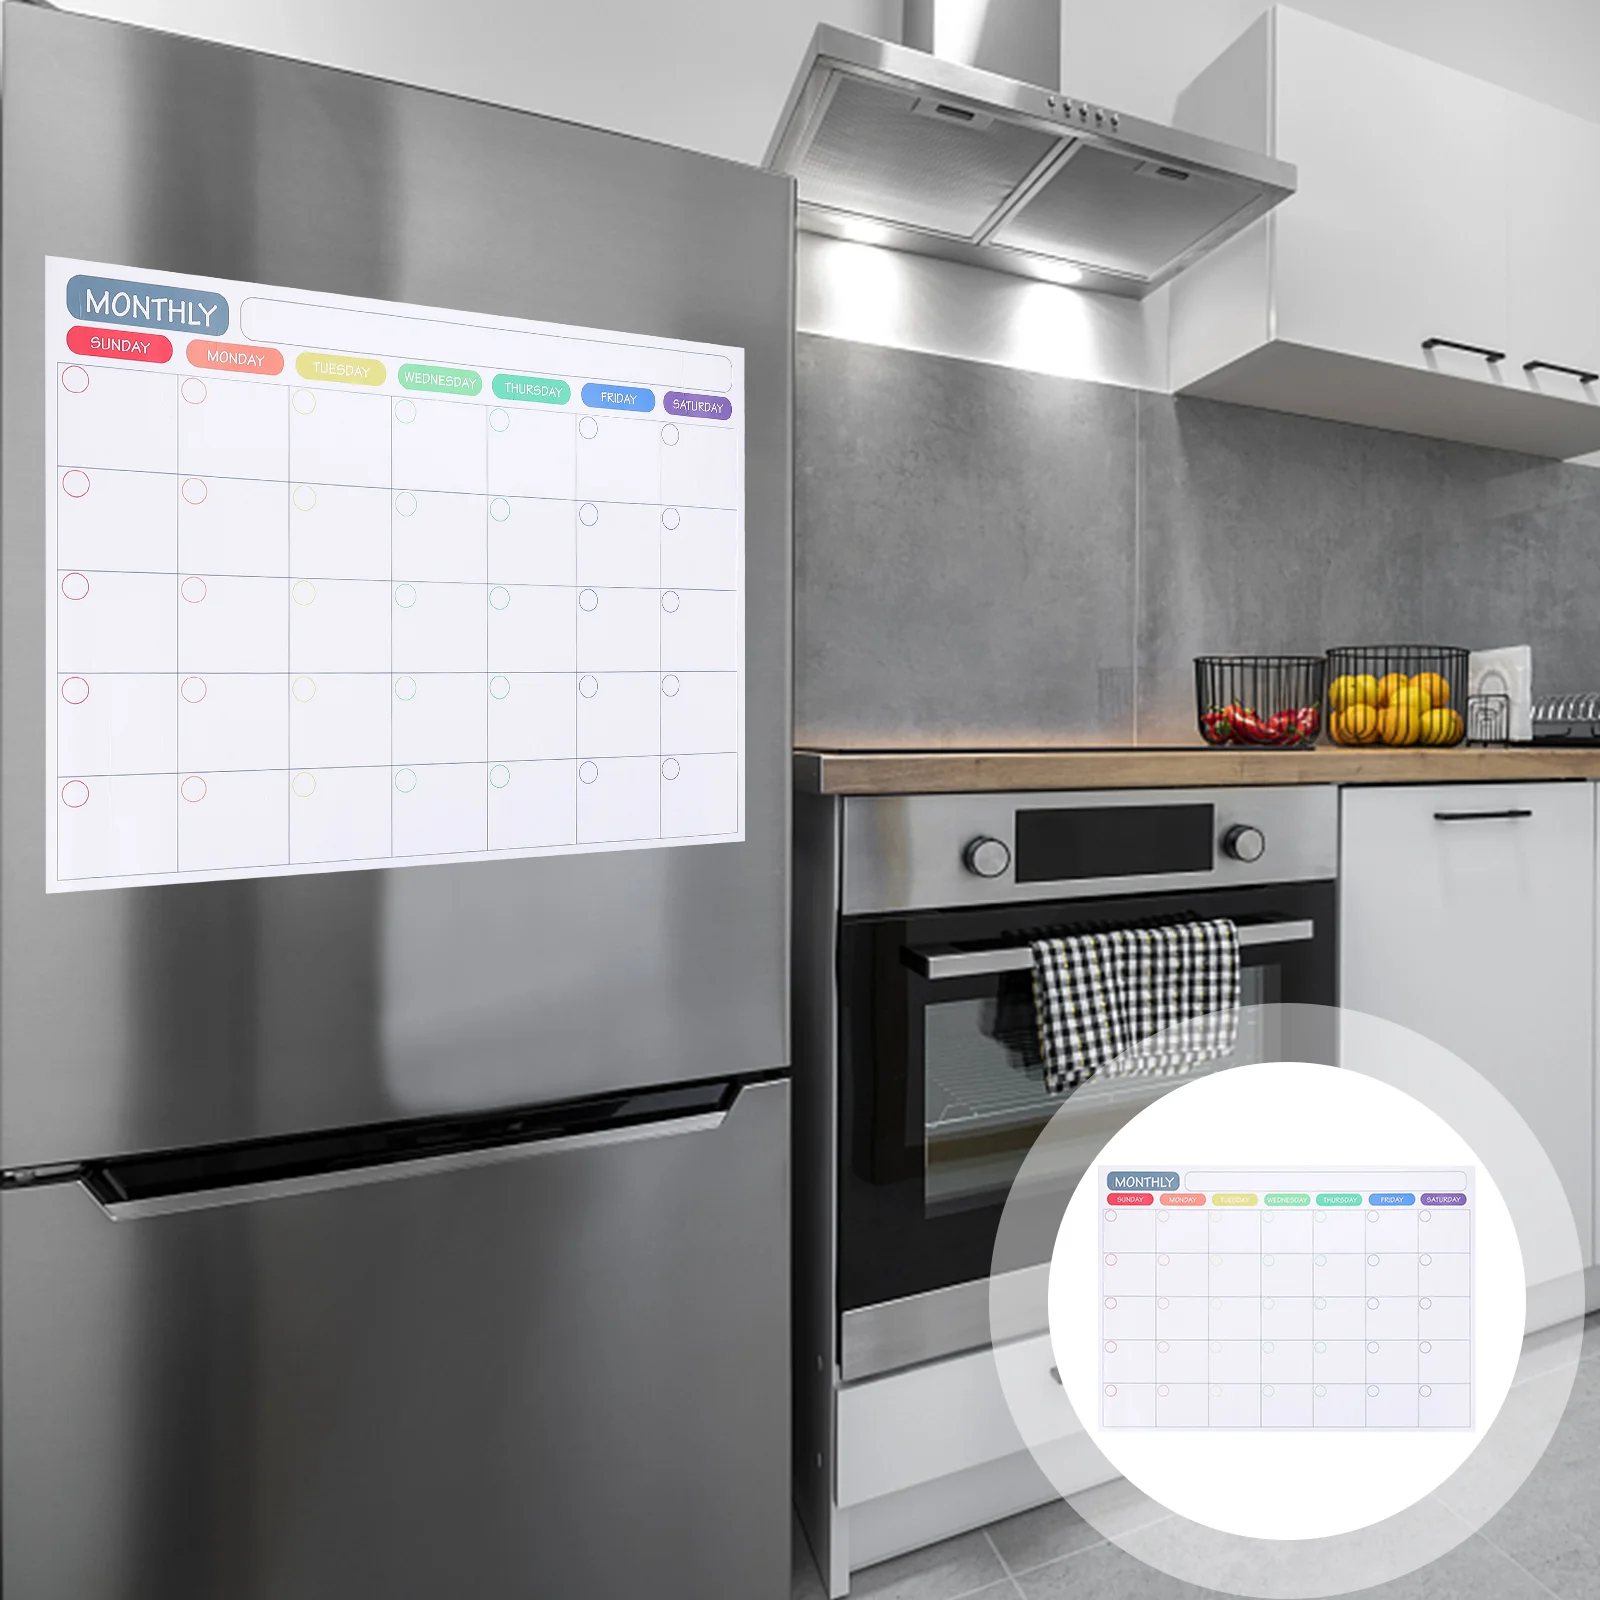 

Weekly Schedule Schedules Erasable White Boards Magnetic Calendar for Fridge The Pet